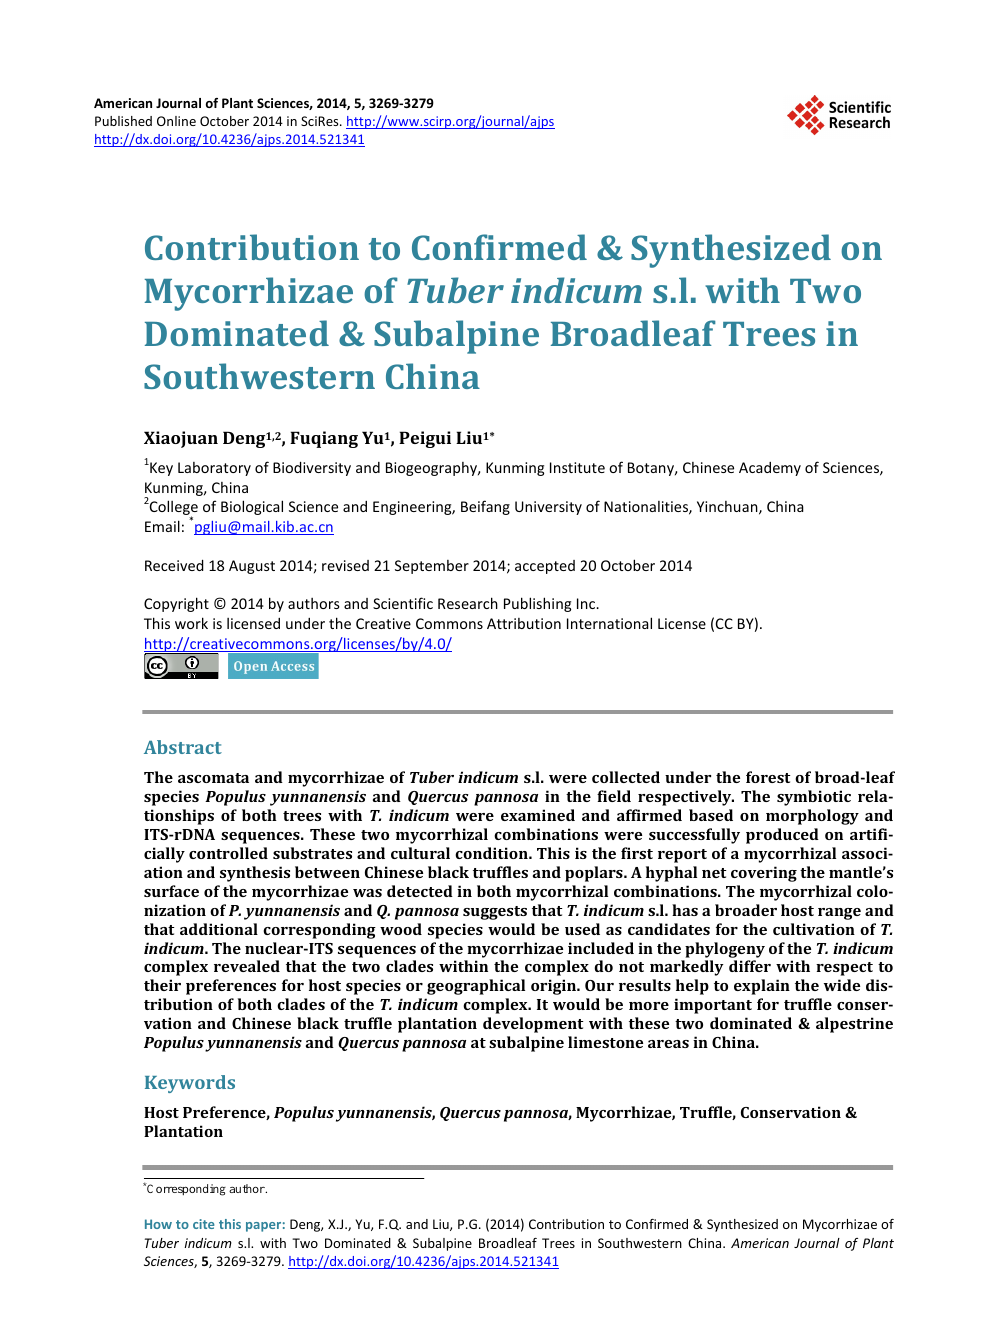 Contribution To Confirmed Amp Synthesized On Mycorrhizae Of Lt I Gt Tuber Indicum Lt I Gt S L With Two Dominated Amp Subalpine Broadleaf Trees In Southwestern China Topic Of Research Paper In Biological Sciences Download Scholarly Article